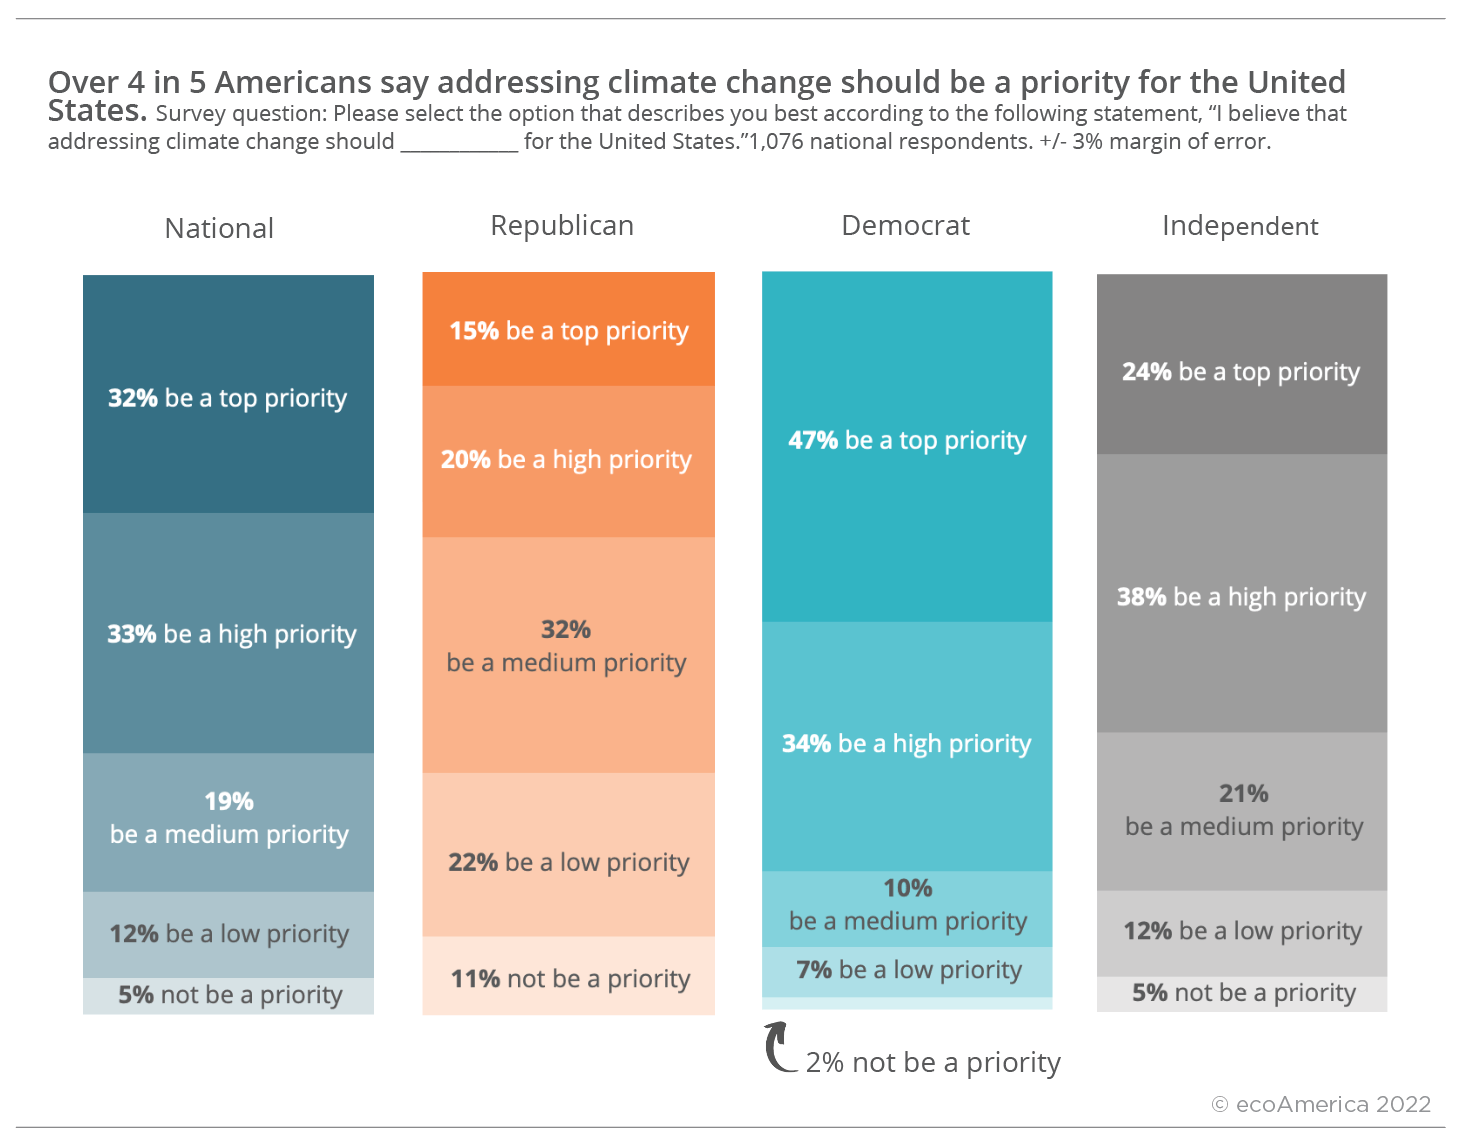 This chart shows that 32% of Americans believe climate change should be a top priority for the United States, 33% believe it should be a high priority, 19% believe it should be a medium priority, 12% believe it should be a low priority and 5% believe it should not be a priority. 15% of Republicans believe climate change should be a top priority, 20% believe it should be a high priority, 32% believe it should be a medium priority, 22% believe it should be a low priority, and 11% believe it should not be a priority 47% of Democrats should believe climate change should be a top priority, 34% believe it should be a high priority, 10% believe it should be a medium priority, 7% believe it should be a low priority, and 2% believe it should not be a priority. 24% of Independents should believe climate change should be a top priority, 38% believe it should be a high priority, 32% believe it should be a medium priority, 12% believe it should be a low priority, and 5% believe it should not be a priority.